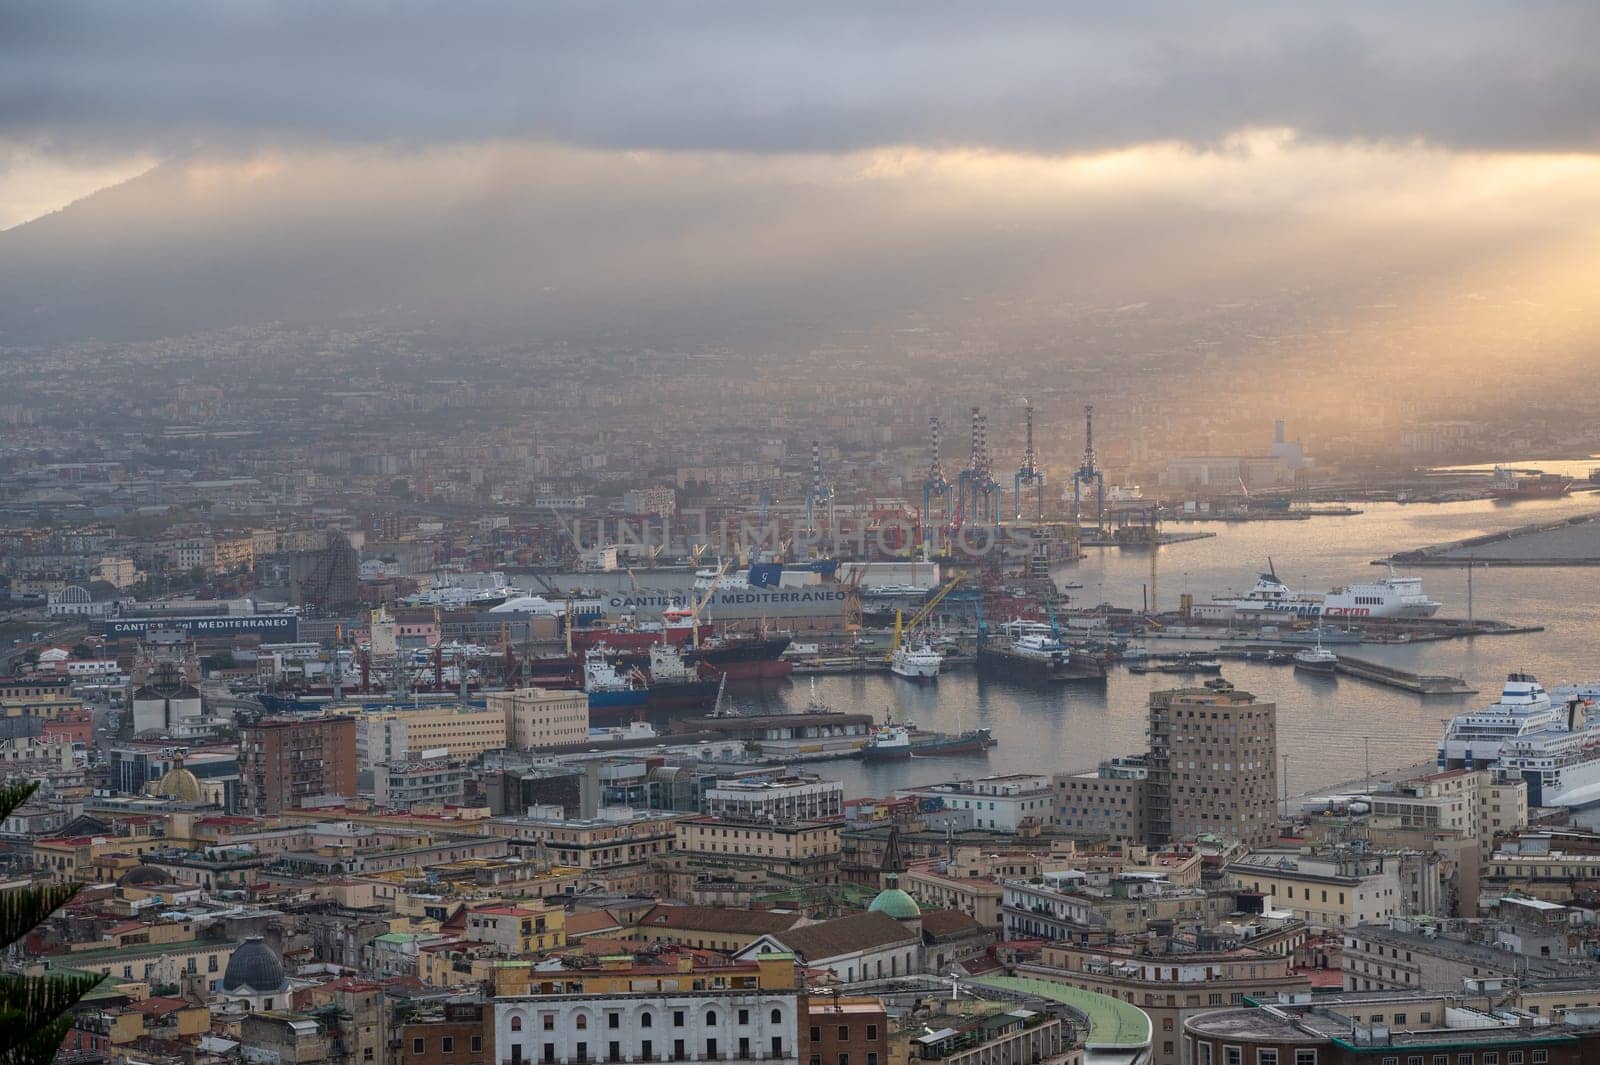 Panorama of the sea port of the city of Napoli in the morning with Vesuvius in the background by martinscphoto